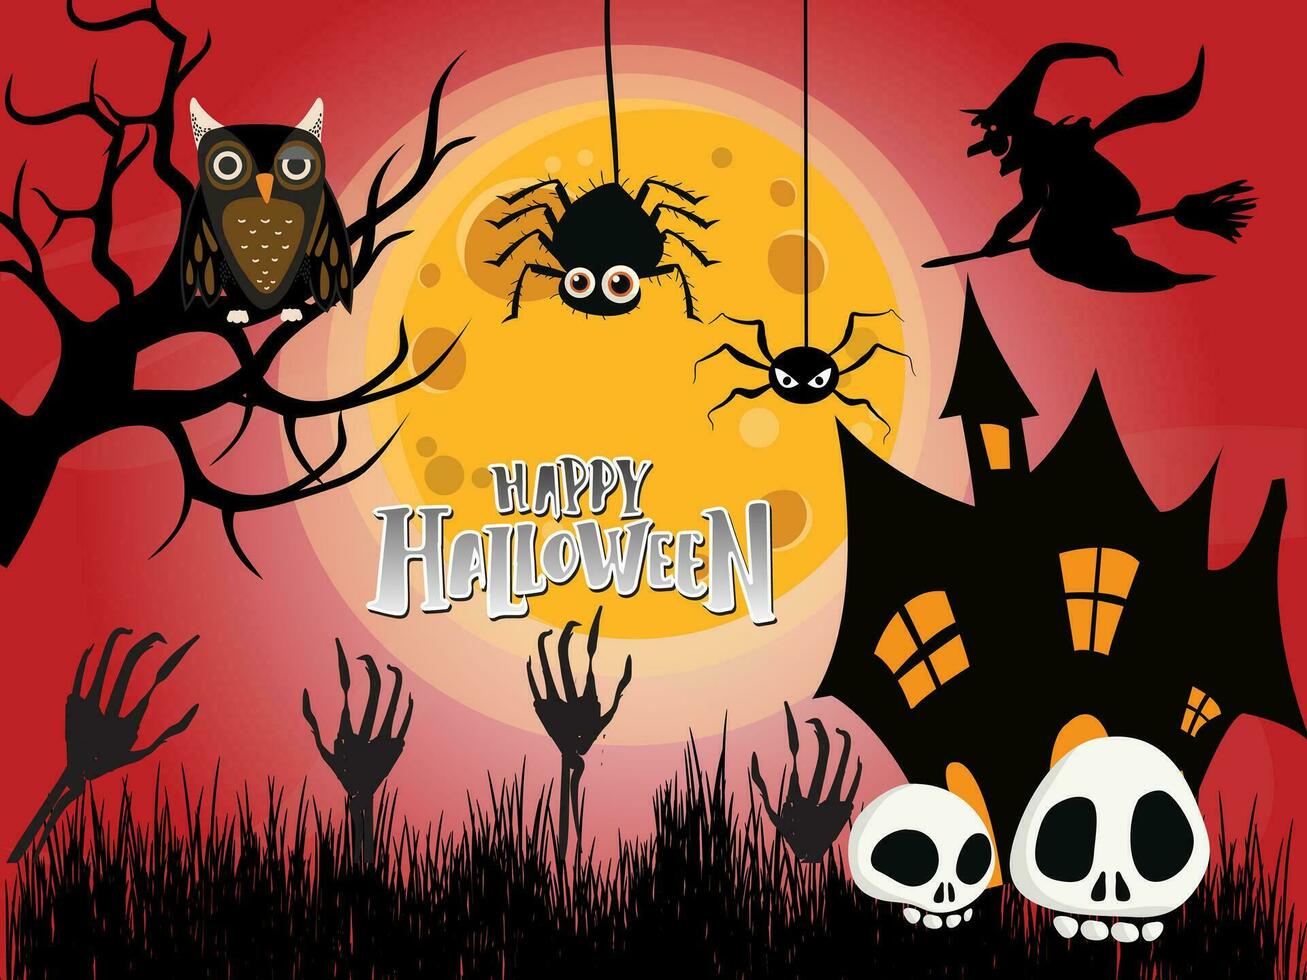 Halloween day festival icons for banners, cards, flyers, social media wallpapers, etc. Halloween illustration. vector